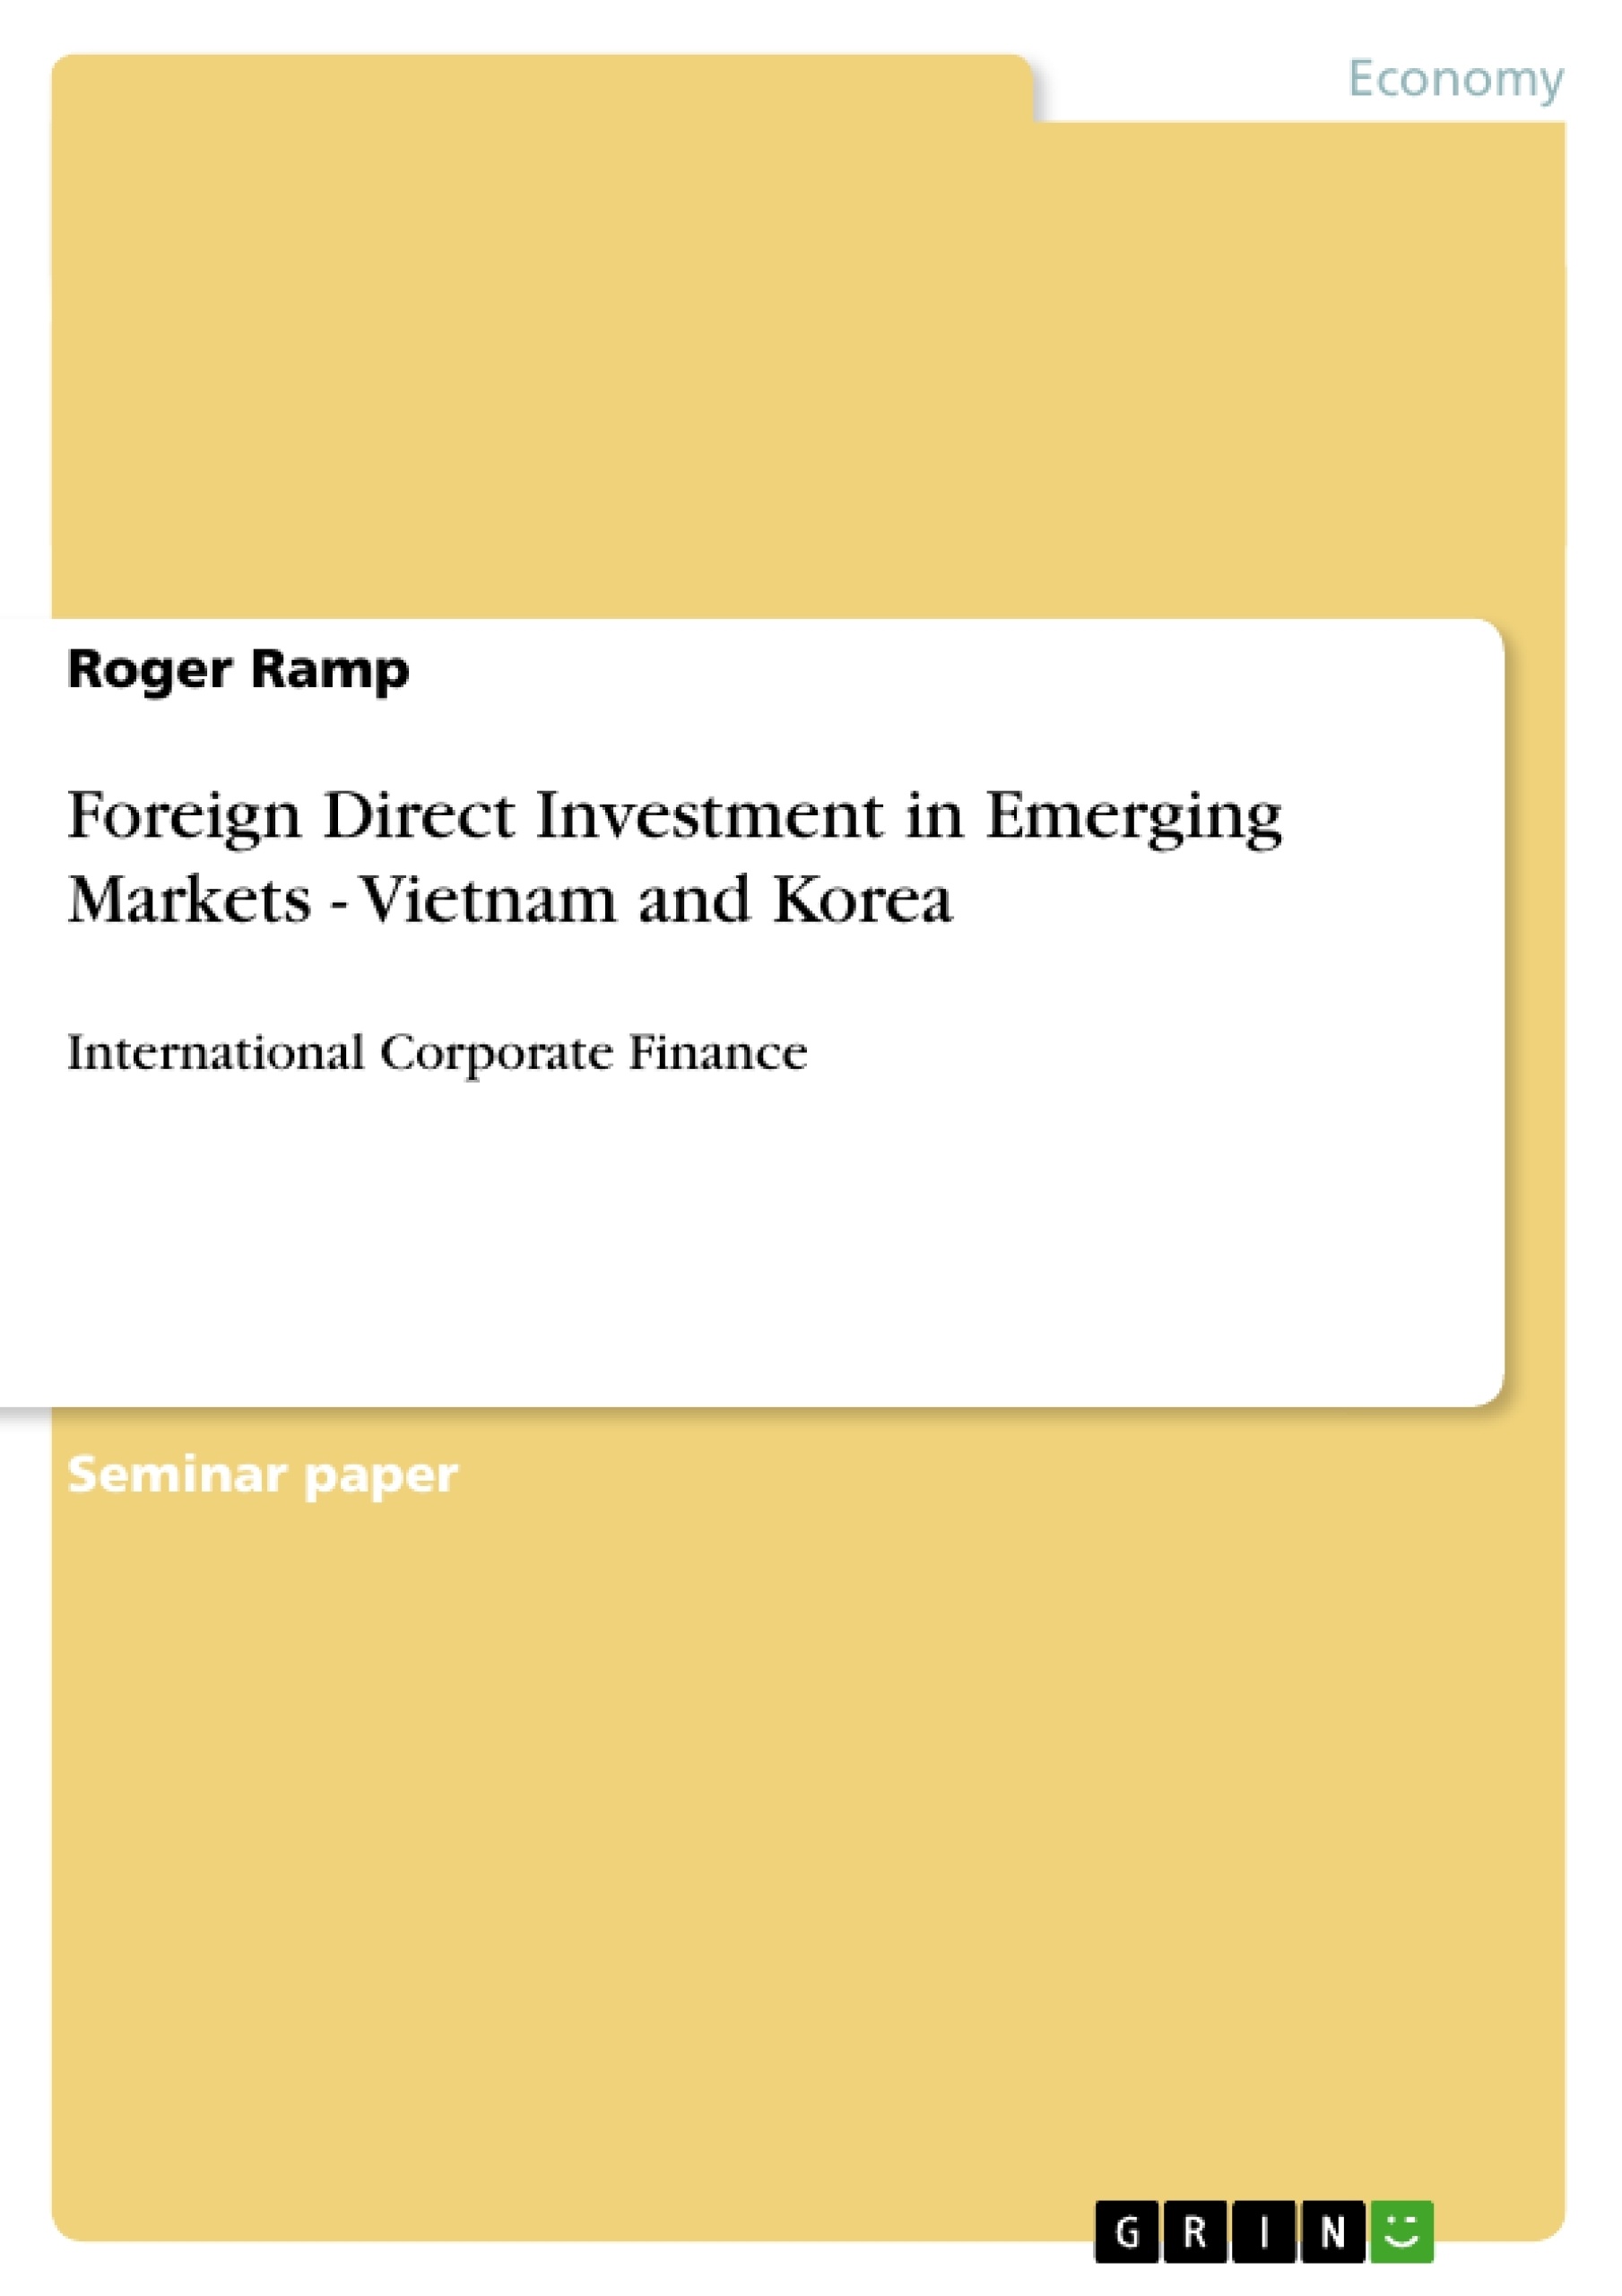 Title: Foreign Direct Investment in Emerging Markets - Vietnam and Korea